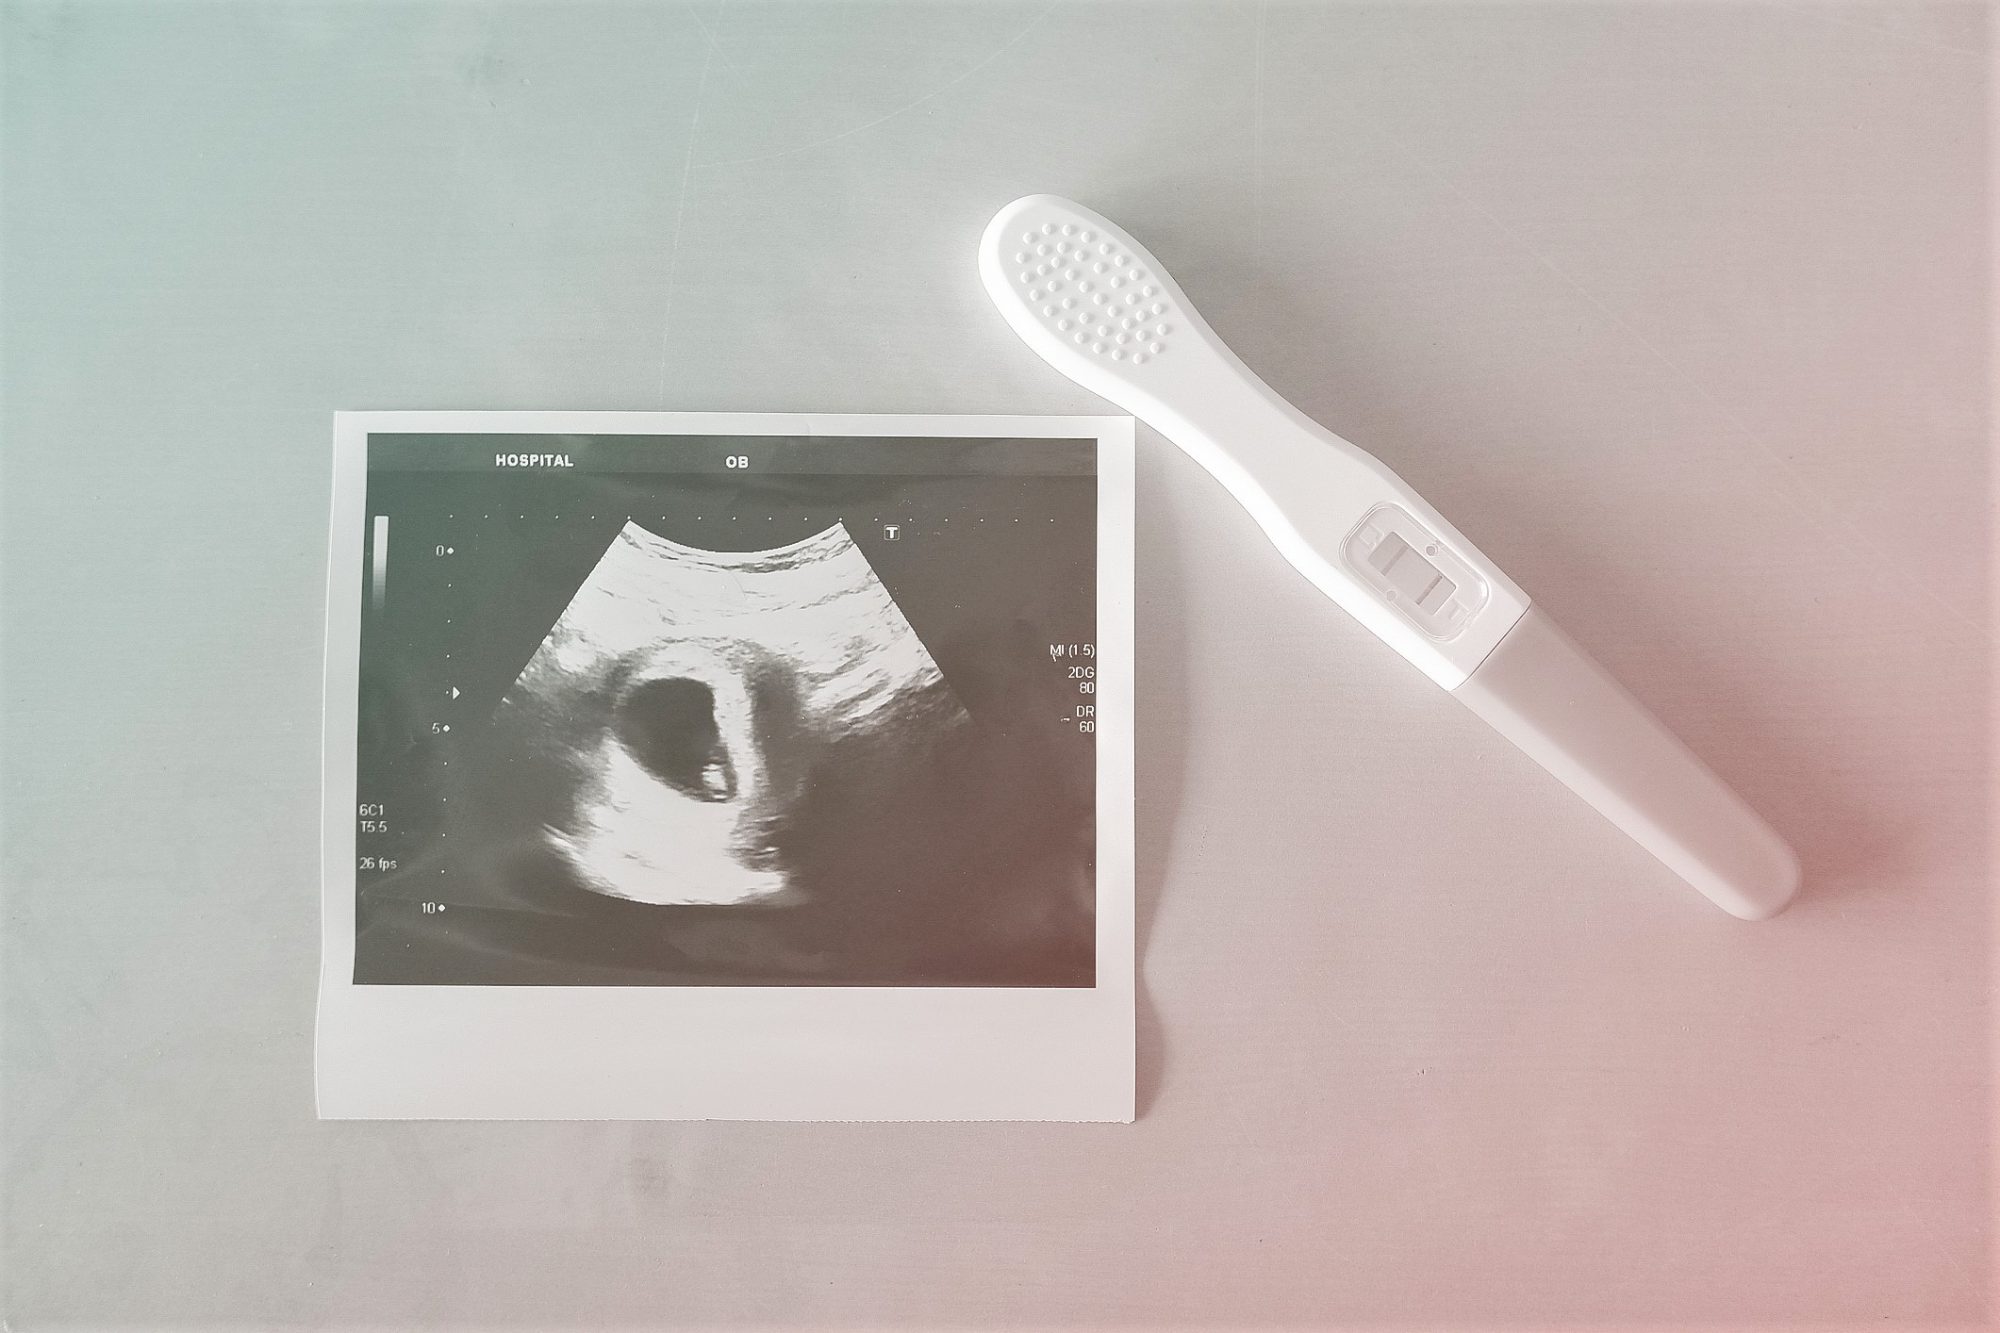 High Angle View Of Ultrasound Photograph By Pregnancy Test On Table